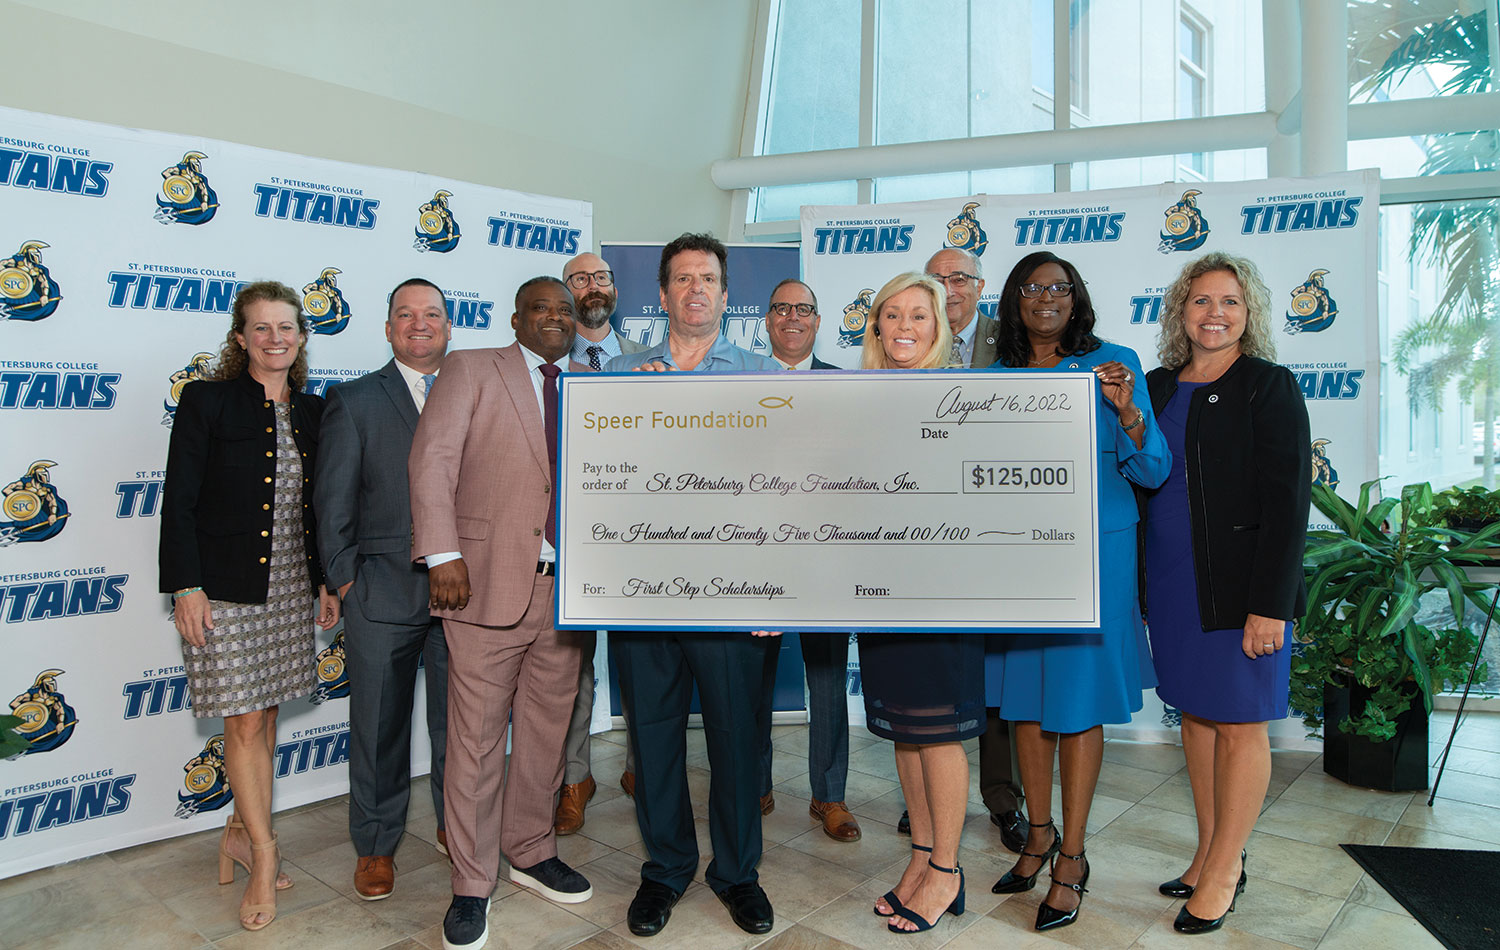 The Speer Foundation presents a generous donation to Saint Petersburg College